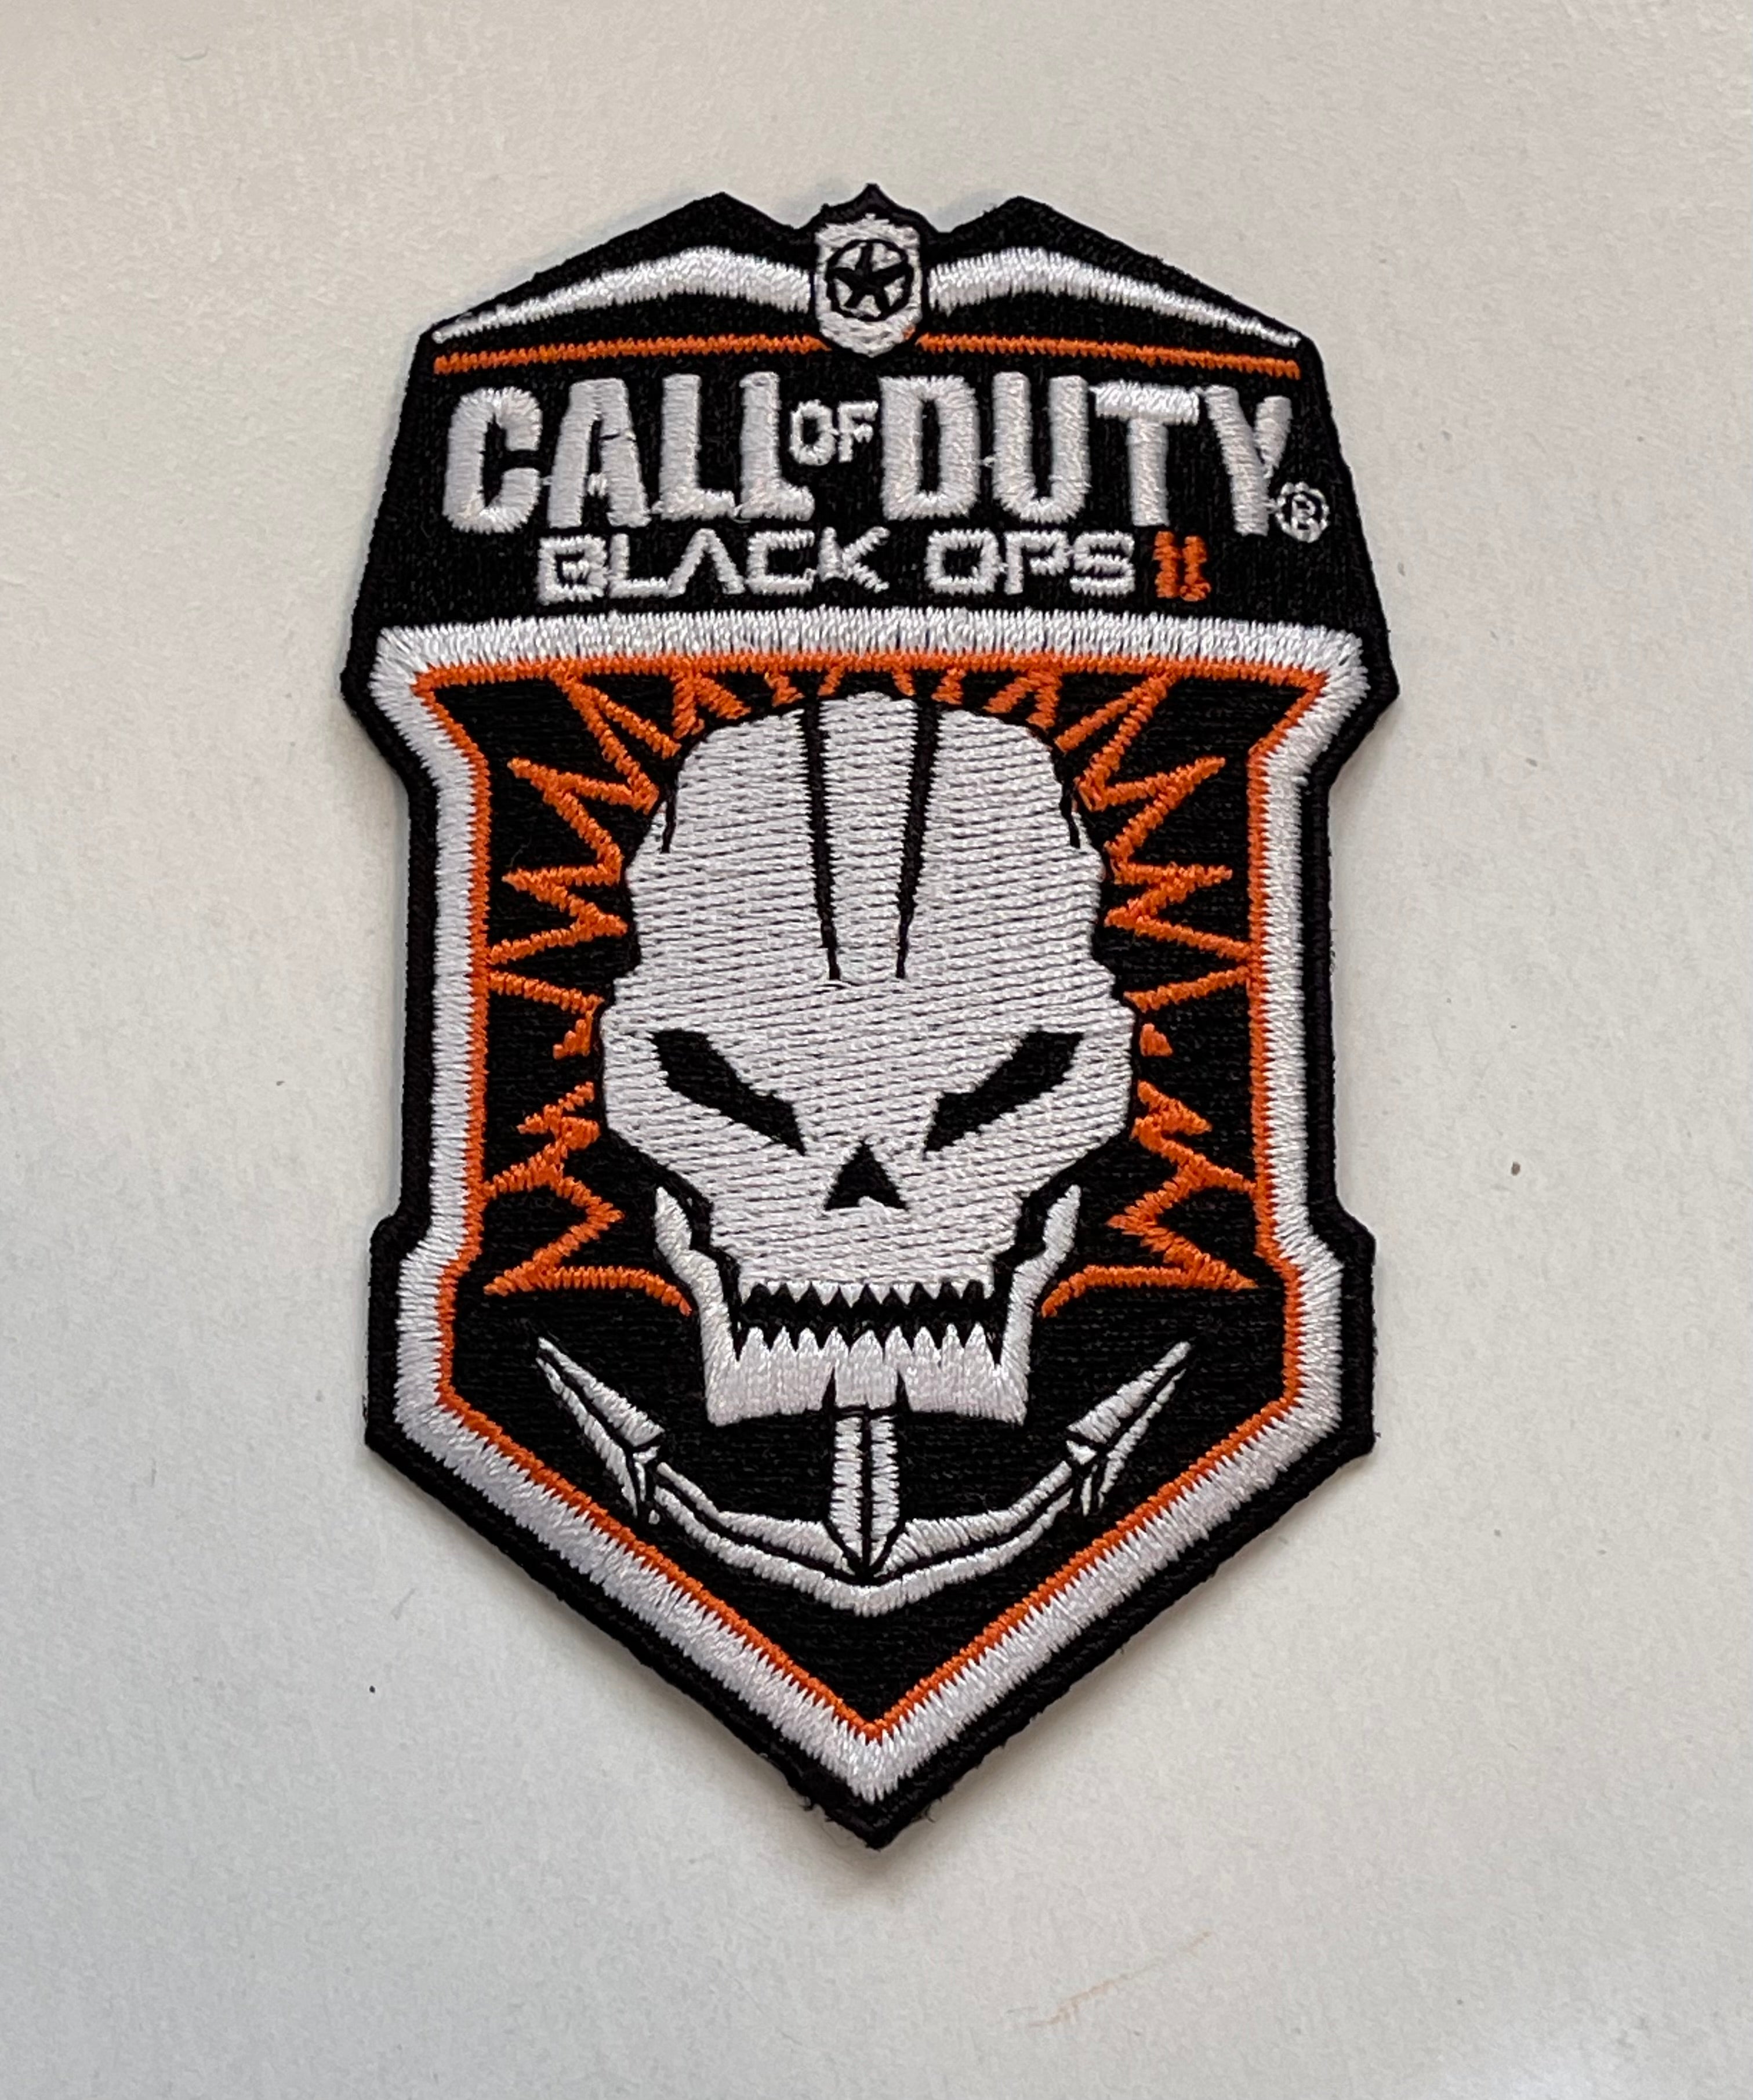 Call of Duty Black Ops patch